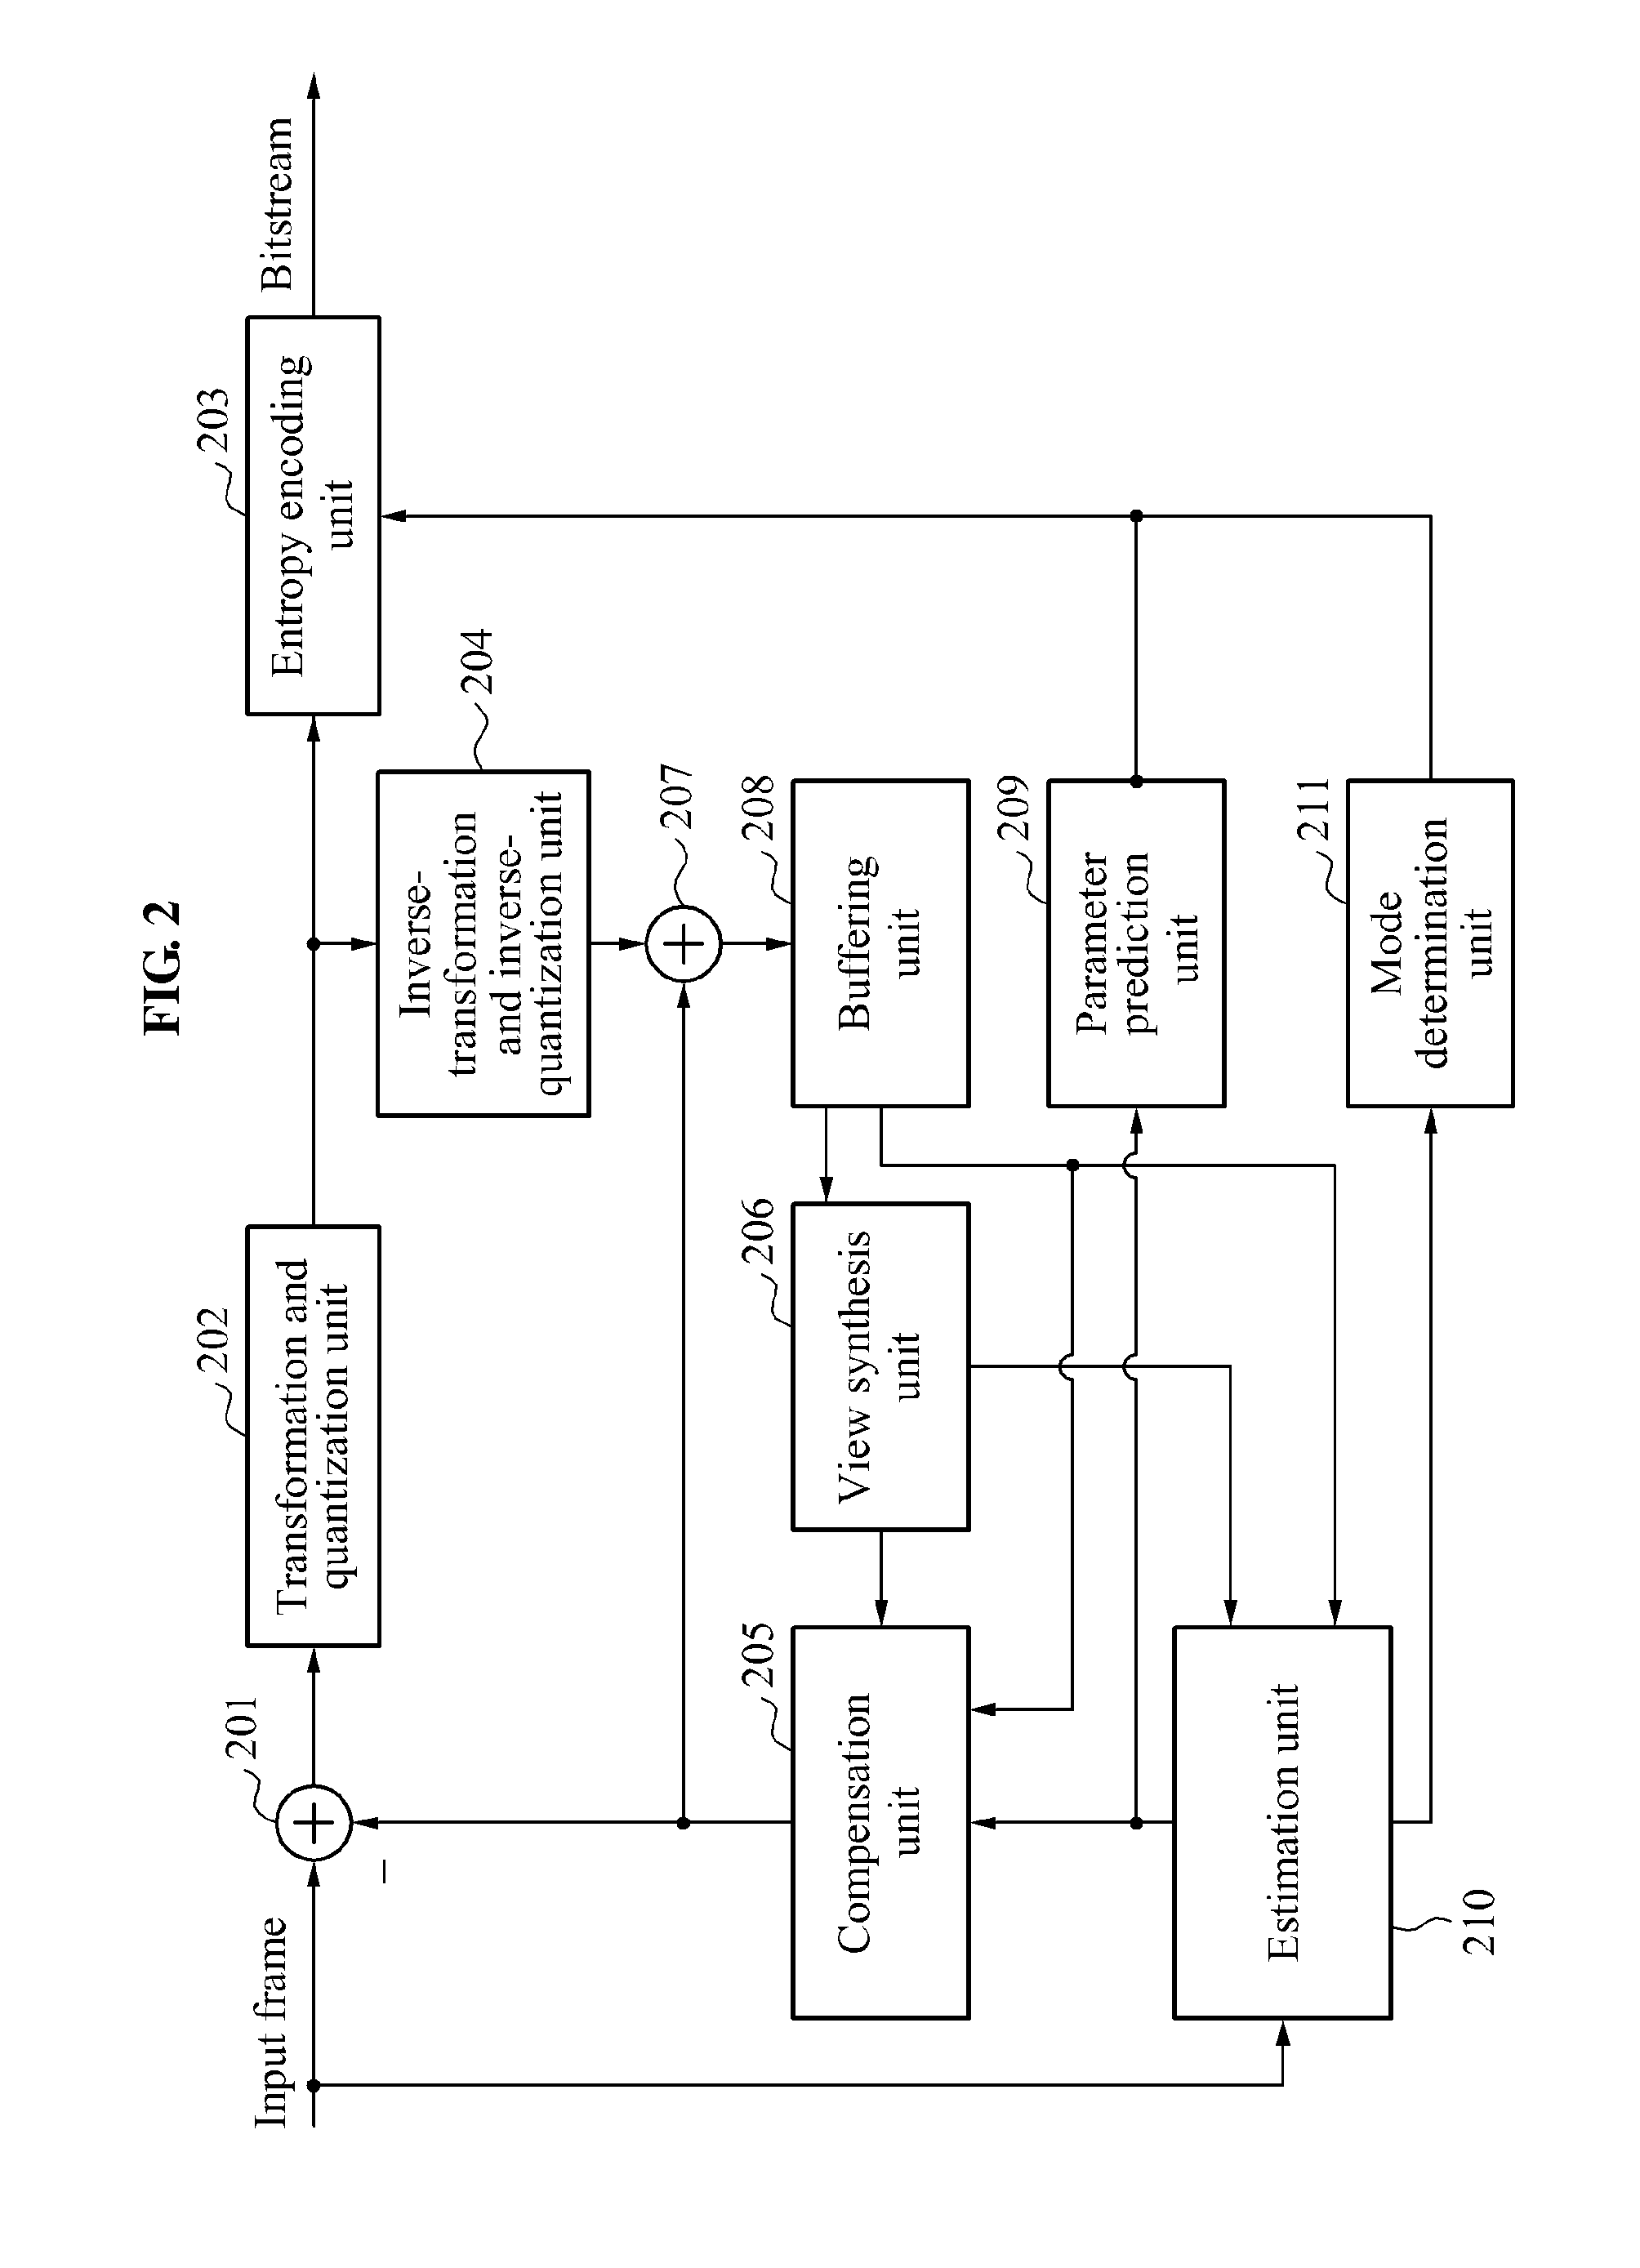 Method of encoding/decoding of multiview video sequence based on adaptive compensation of local illumination mismatches at interframe prediction